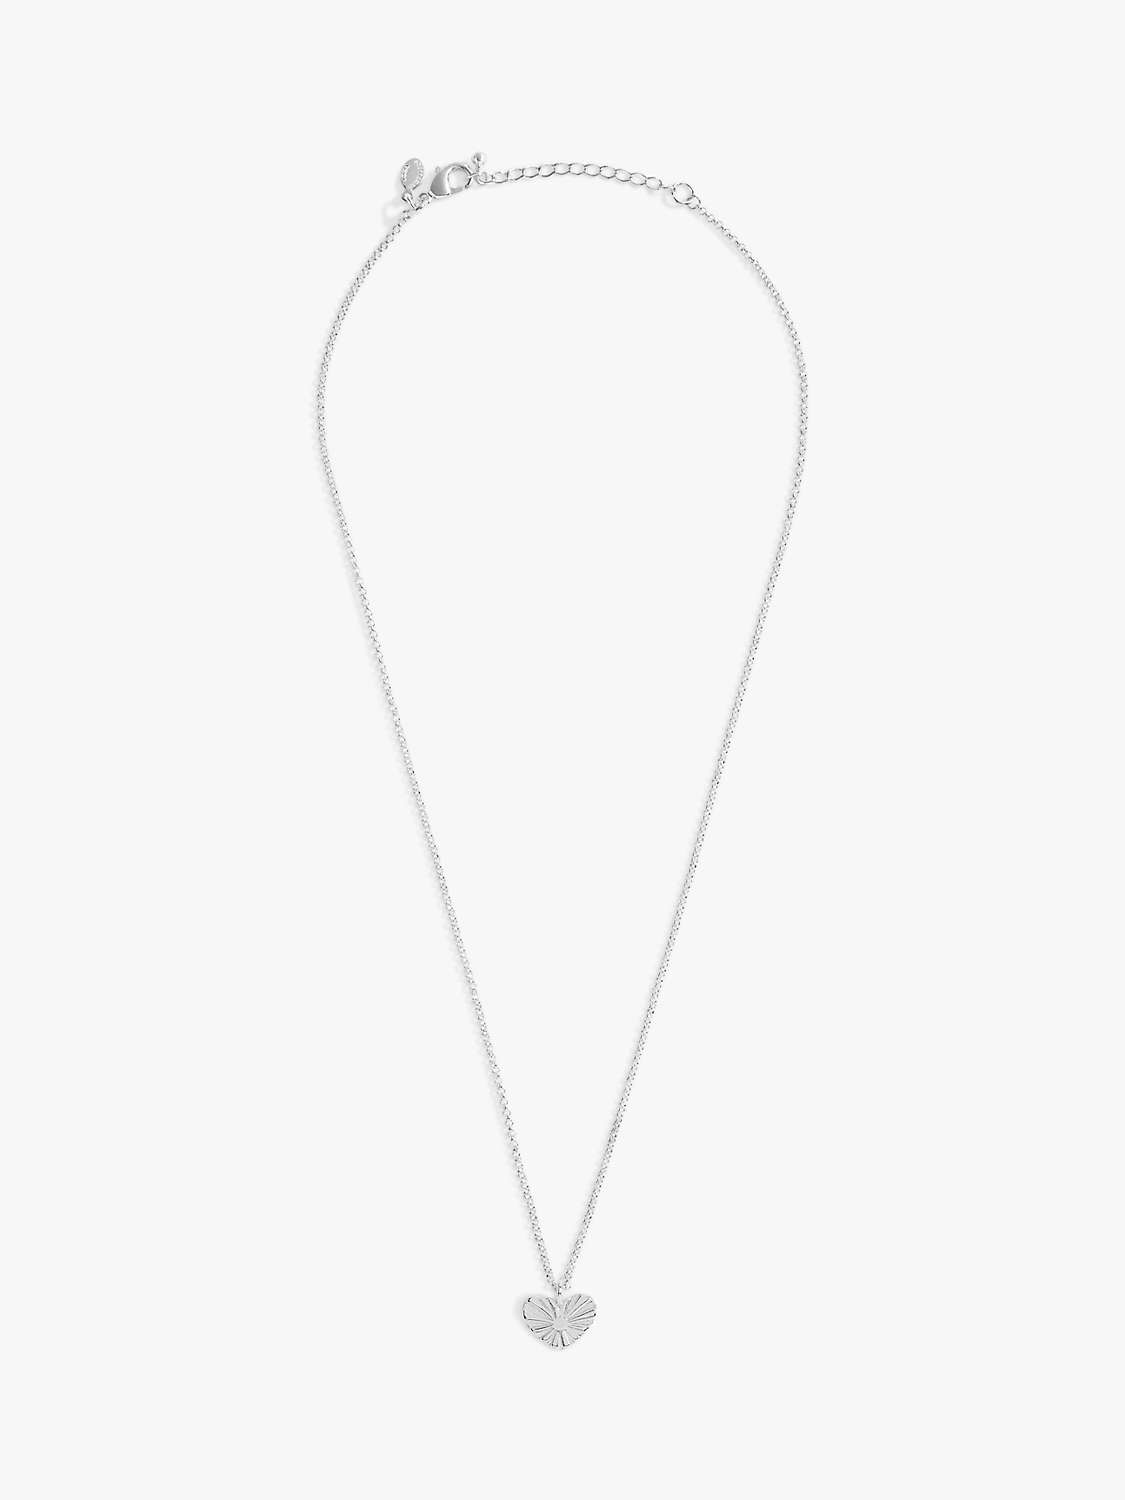 Buy Joma Jewellery 'She Believed She Could So She Did' Necklace, Silver Online at johnlewis.com